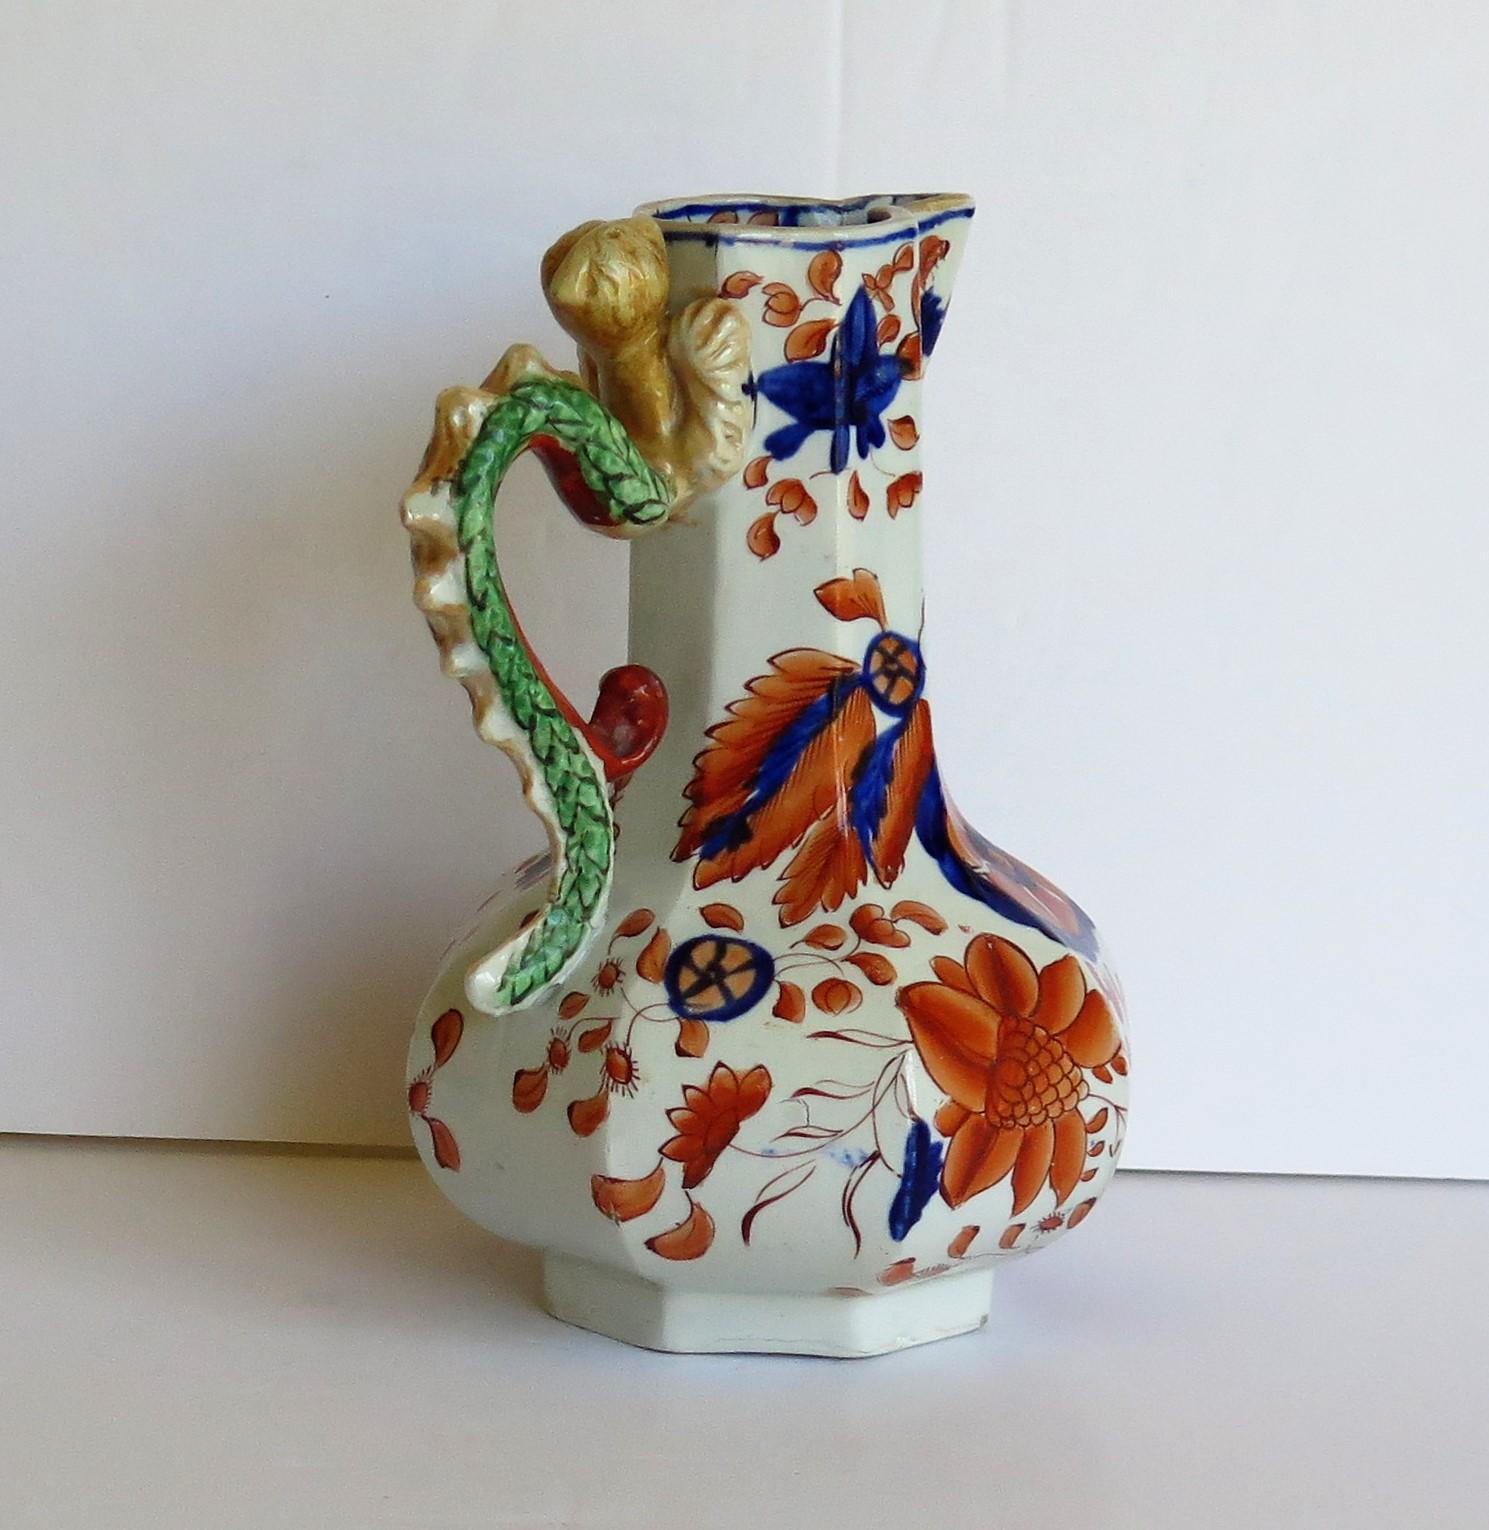 Hand-Painted Very rare Georgian Mason's Ironstone Jug or Pitcher, Flowers and Wheels pattern